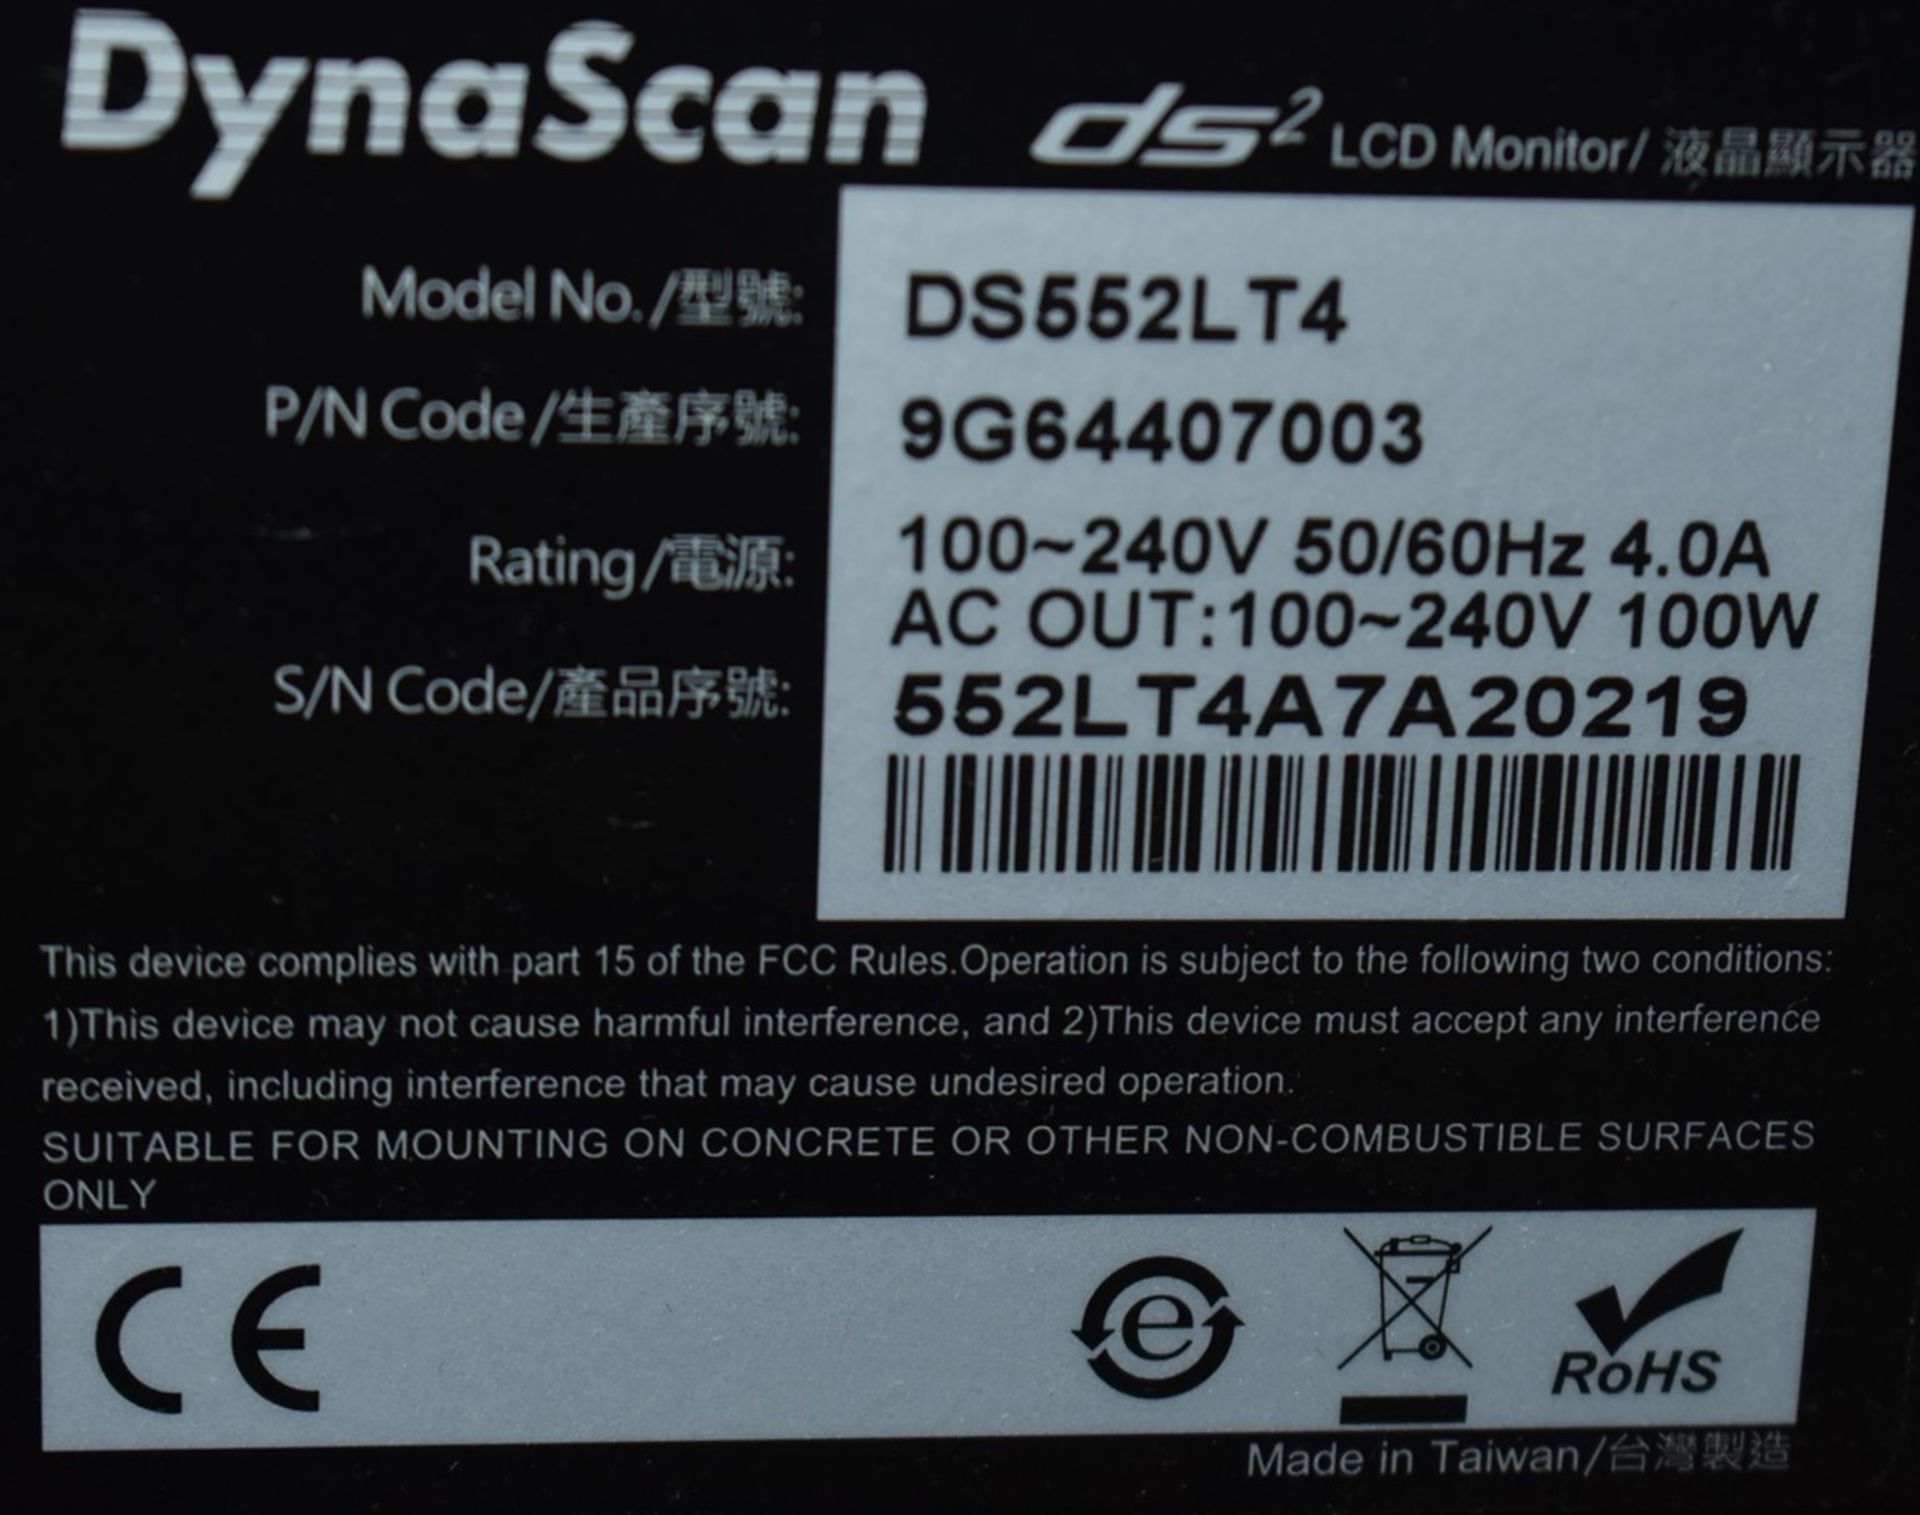 1 x DynaScan ds2 55 Inch LCD Fanless Monitor With Security Metal Enclosure and Signature Book IPC Sy - Image 7 of 10